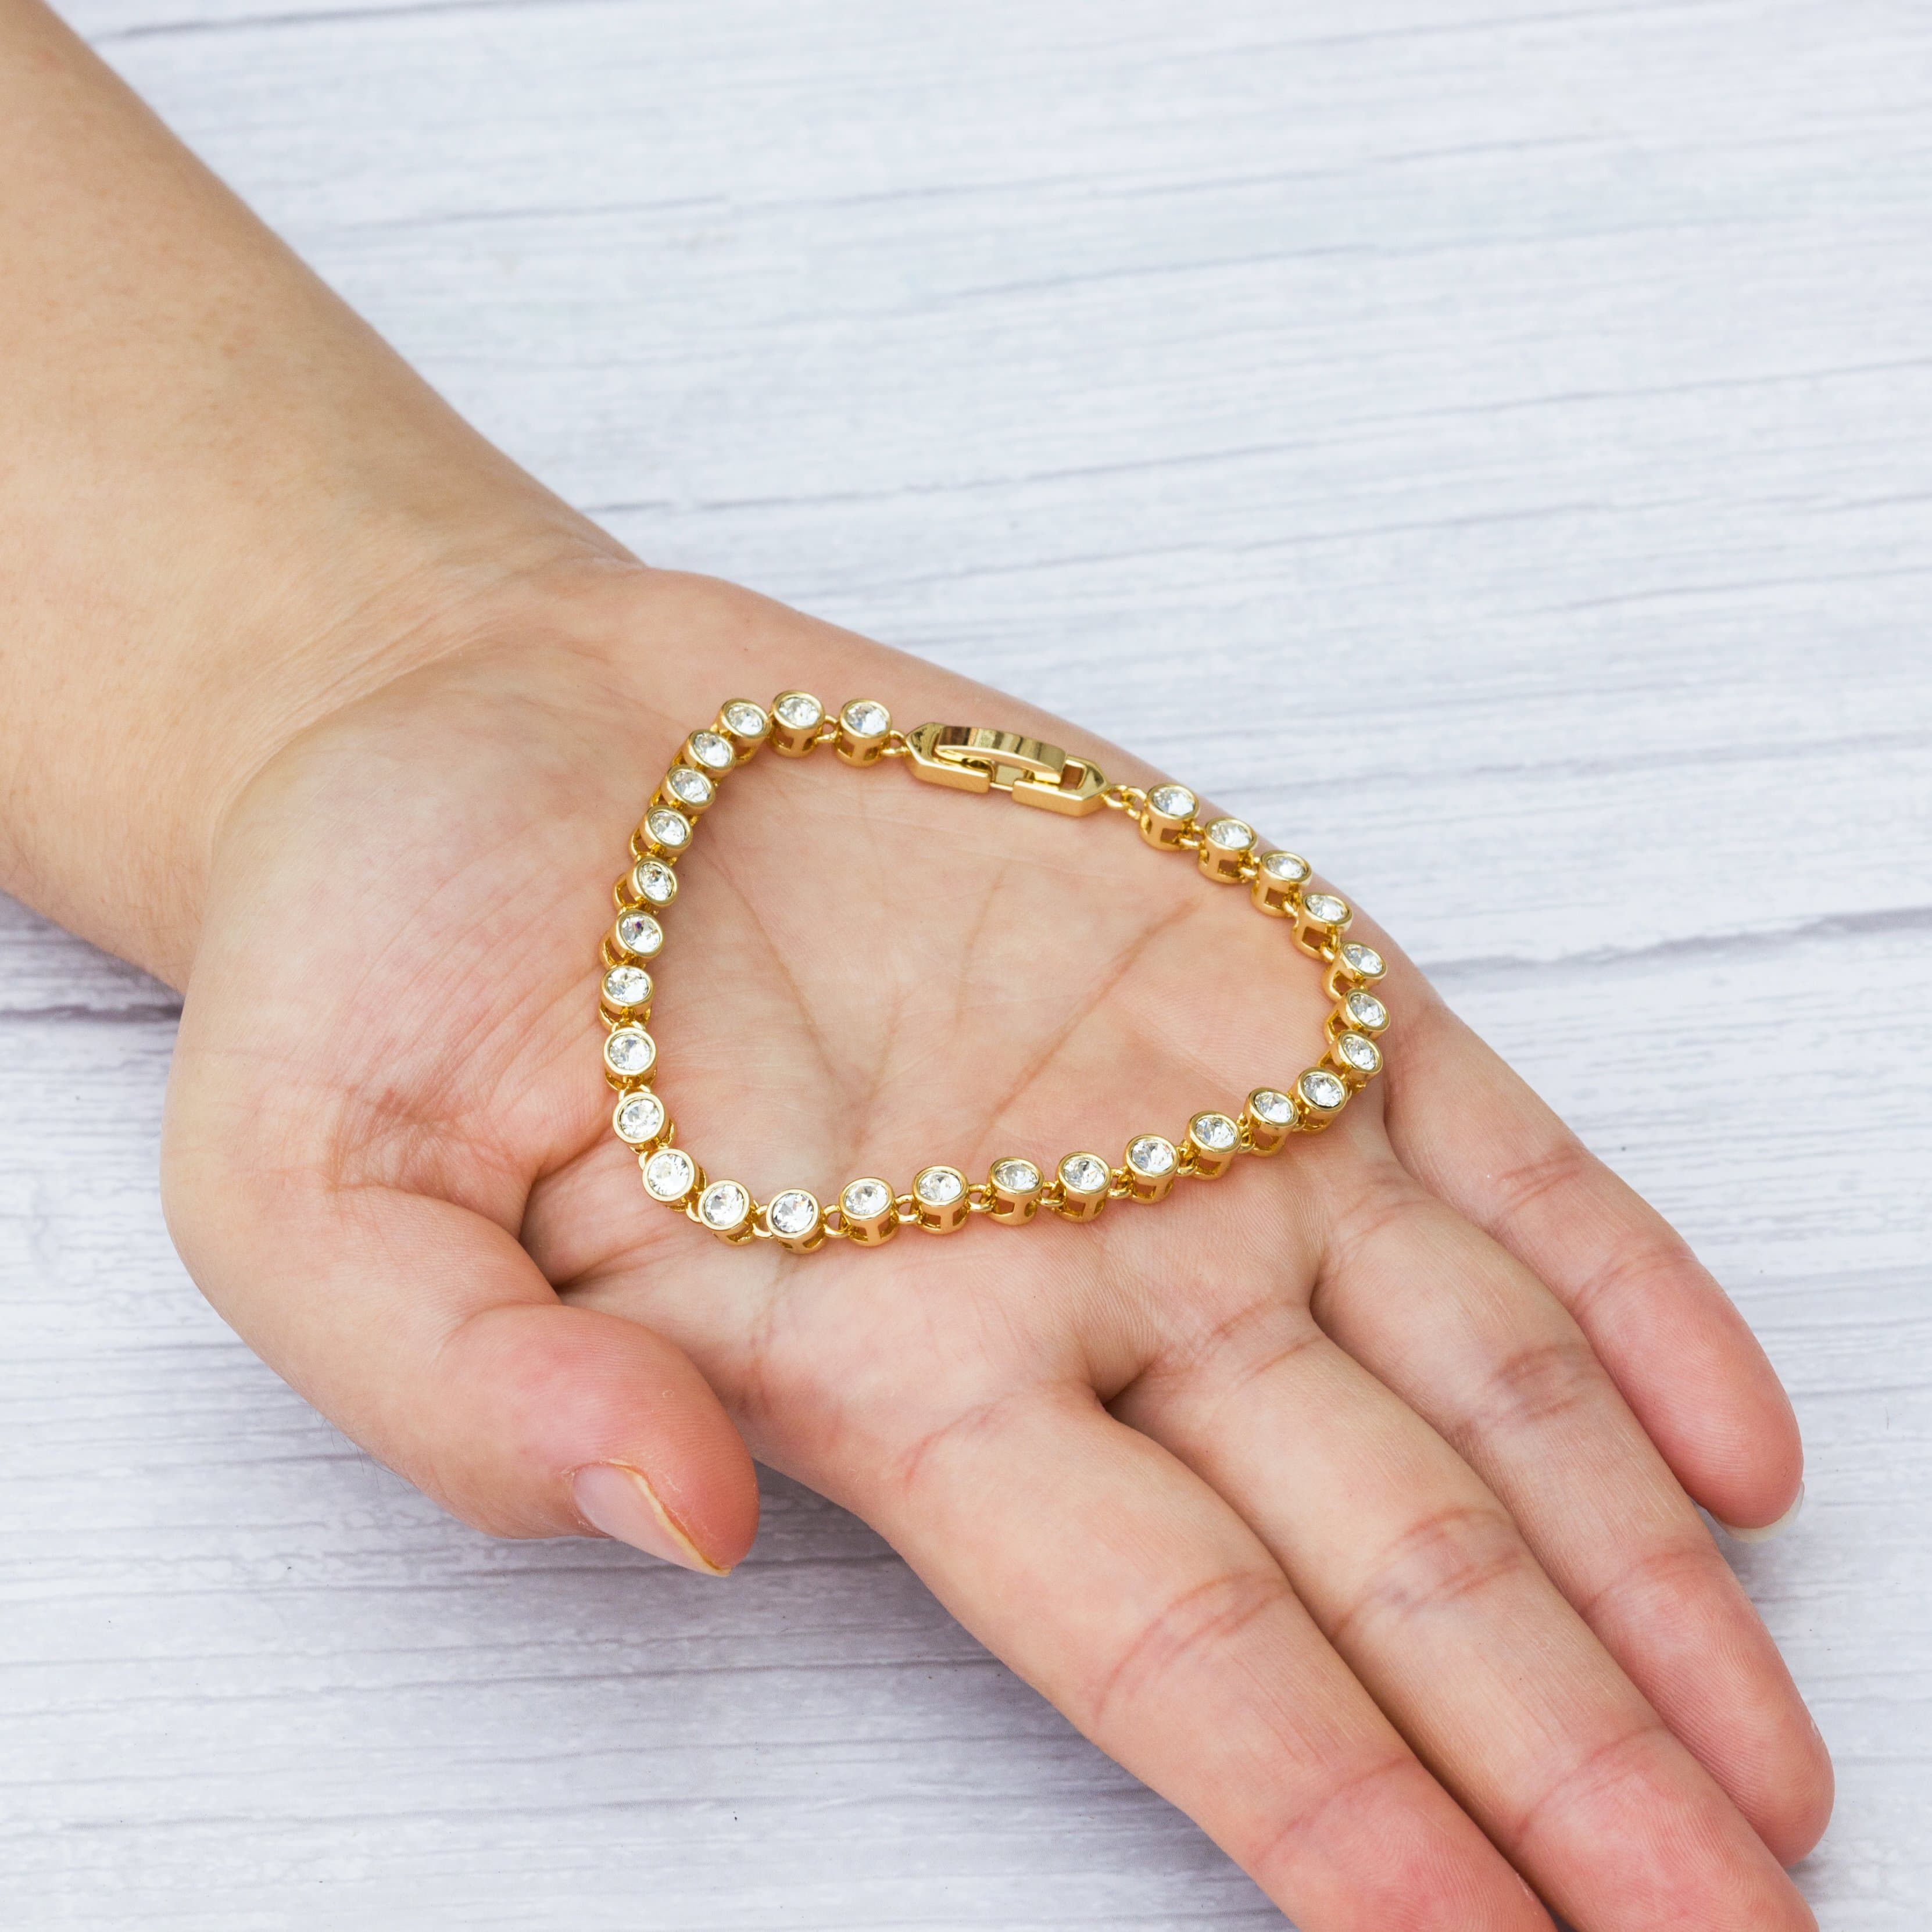 Gold Plated Solitaire Bracelet Created with Zircondia® Crystals